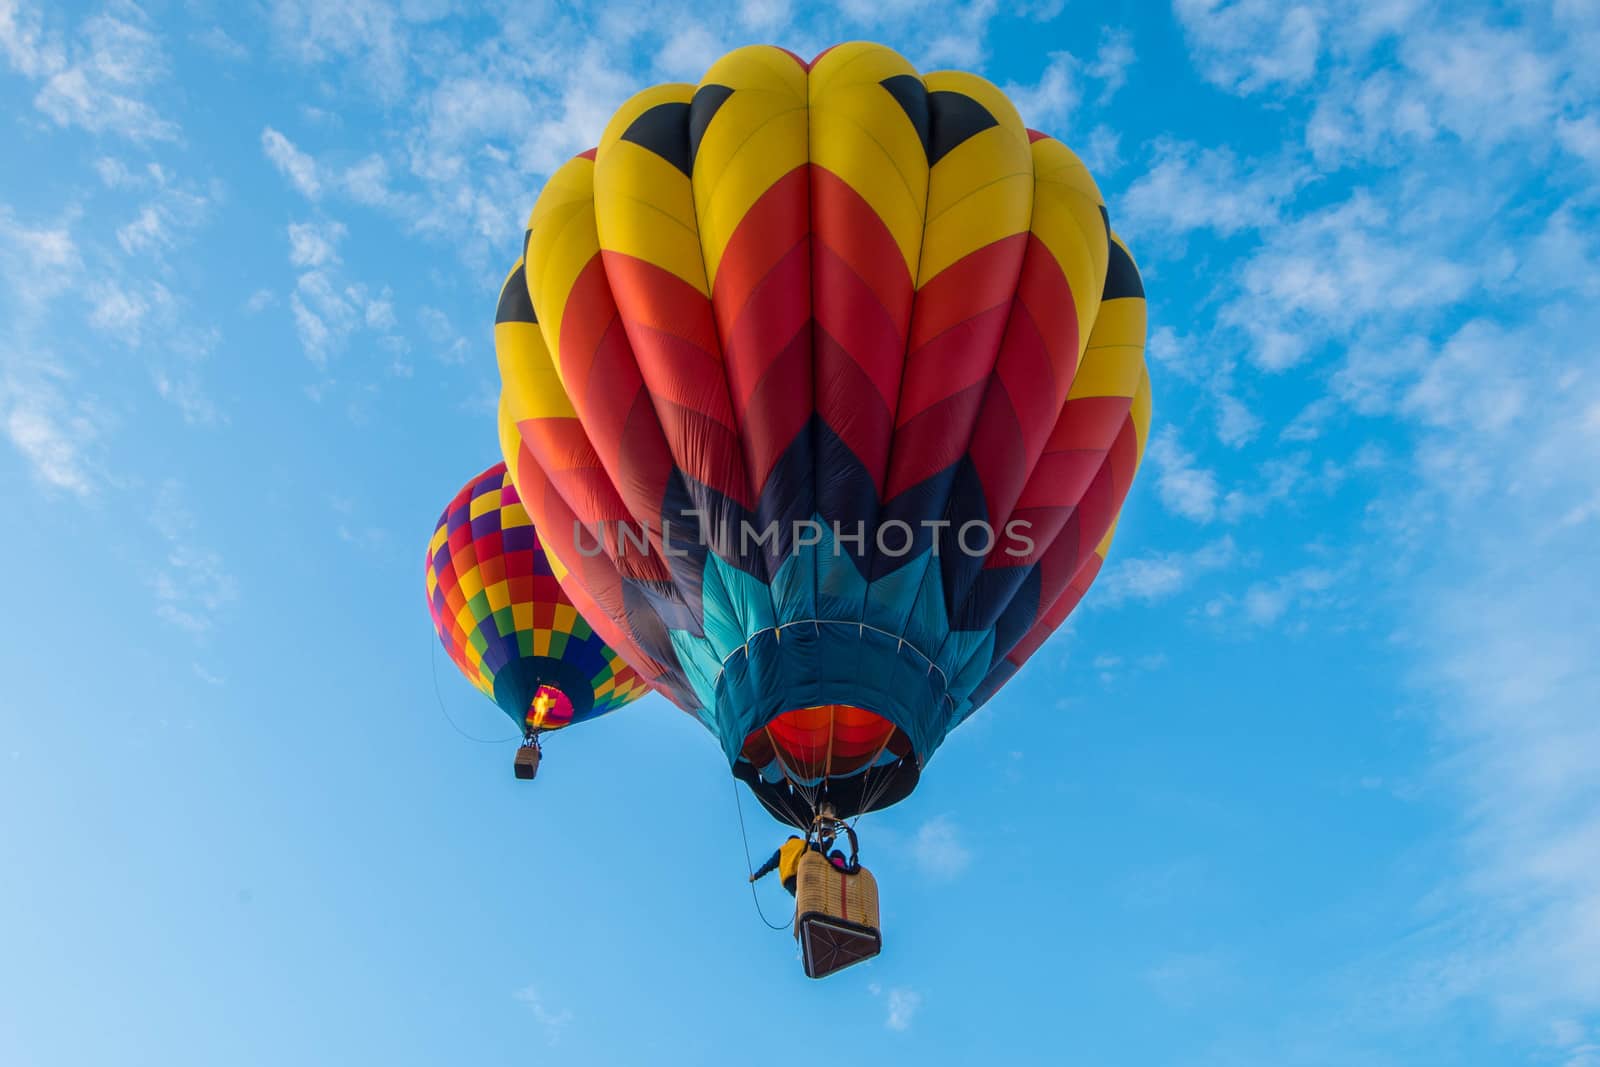 Every Fall, dozens of hot air balloons gather in Eastern Washington for three days of ballooning and harvest festival